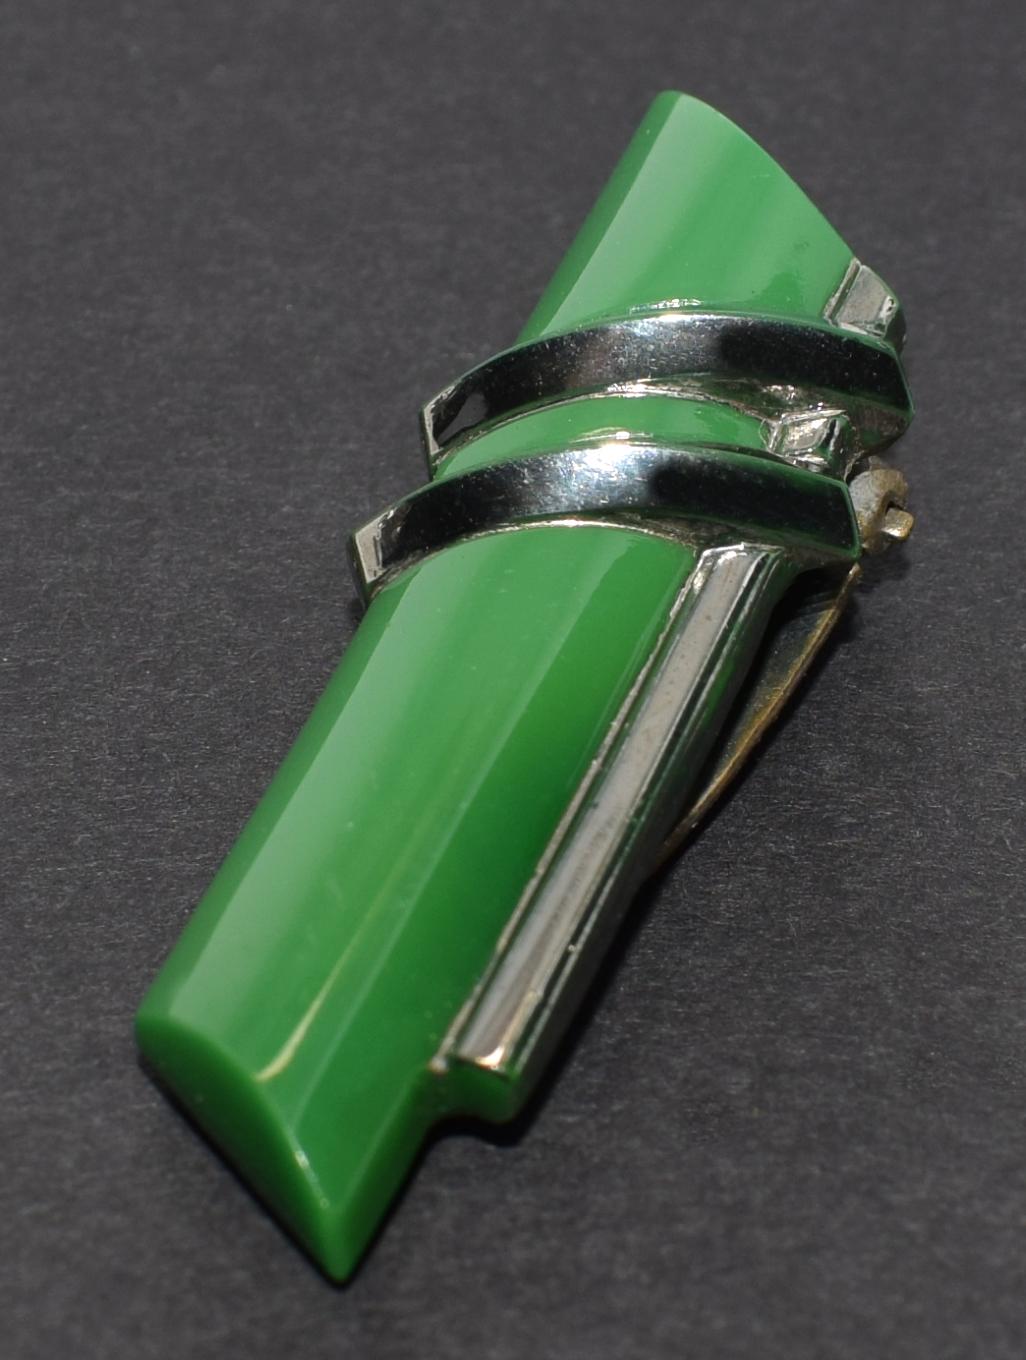 For your consideration is this very stylish Modernist Dress Clip by Jakob Bengel. Dating to the 1930's this is a very innovative and individual piece of jewellery, aesthetically characterised by the lightness in the design. Features a green Galalith